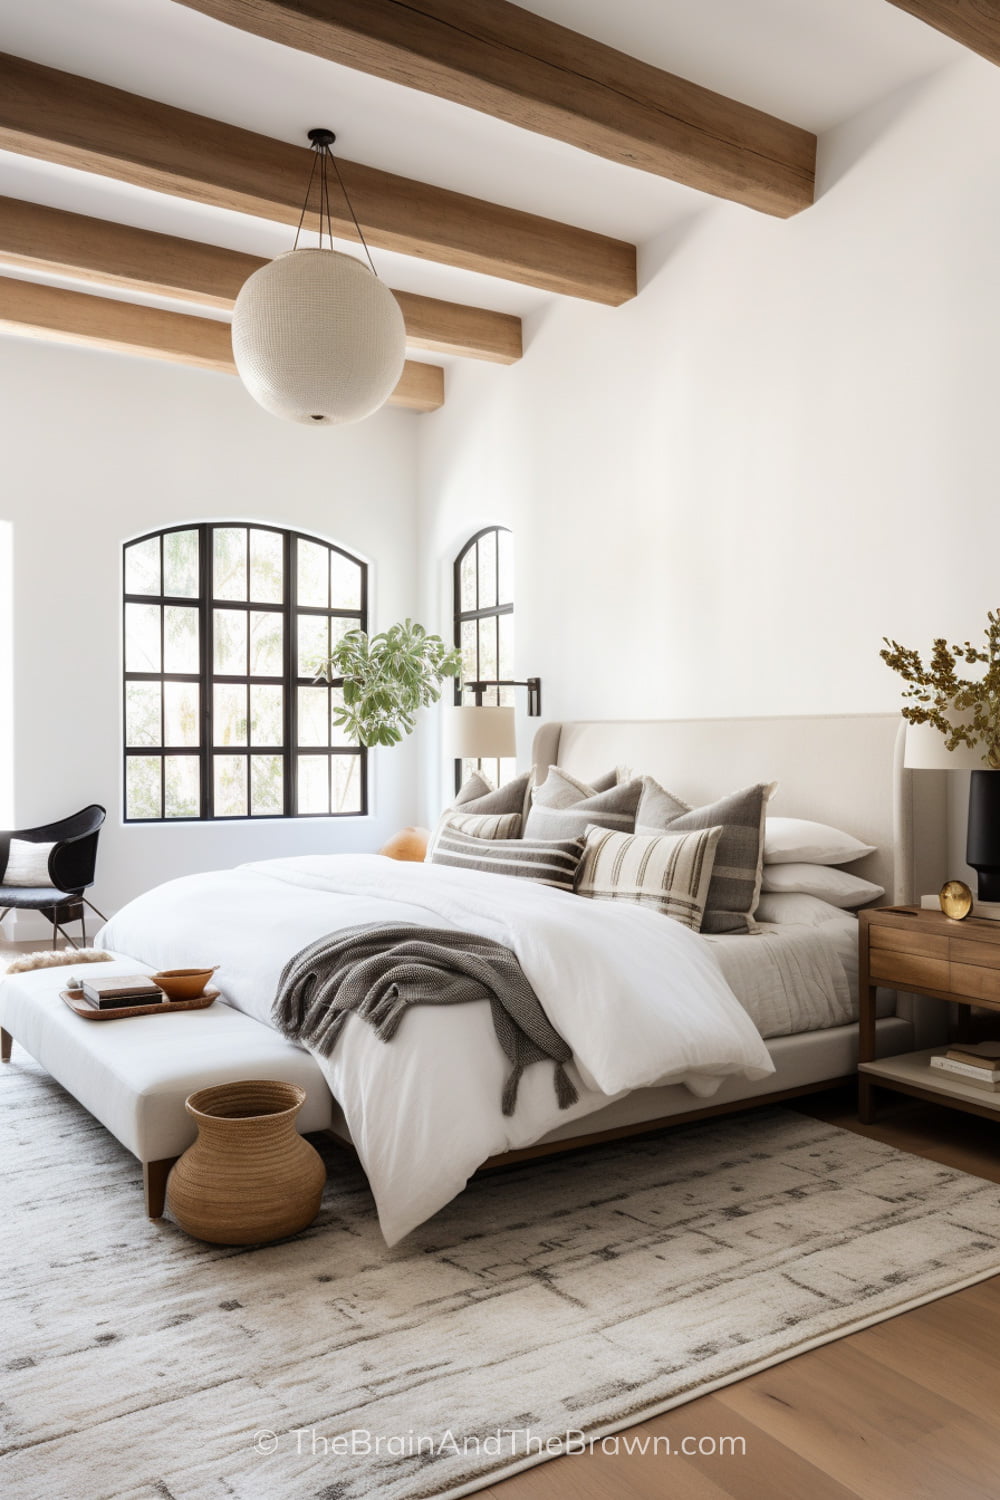 A bedroom with wooden beams, round light fixture and black paned windows with an upholstered bed frame design. White bedding on the bed with neutral colored pillows and wooden nightstands on each side of the bed. A white bench sits at the end of the bed and a large white rug lays under the bed.